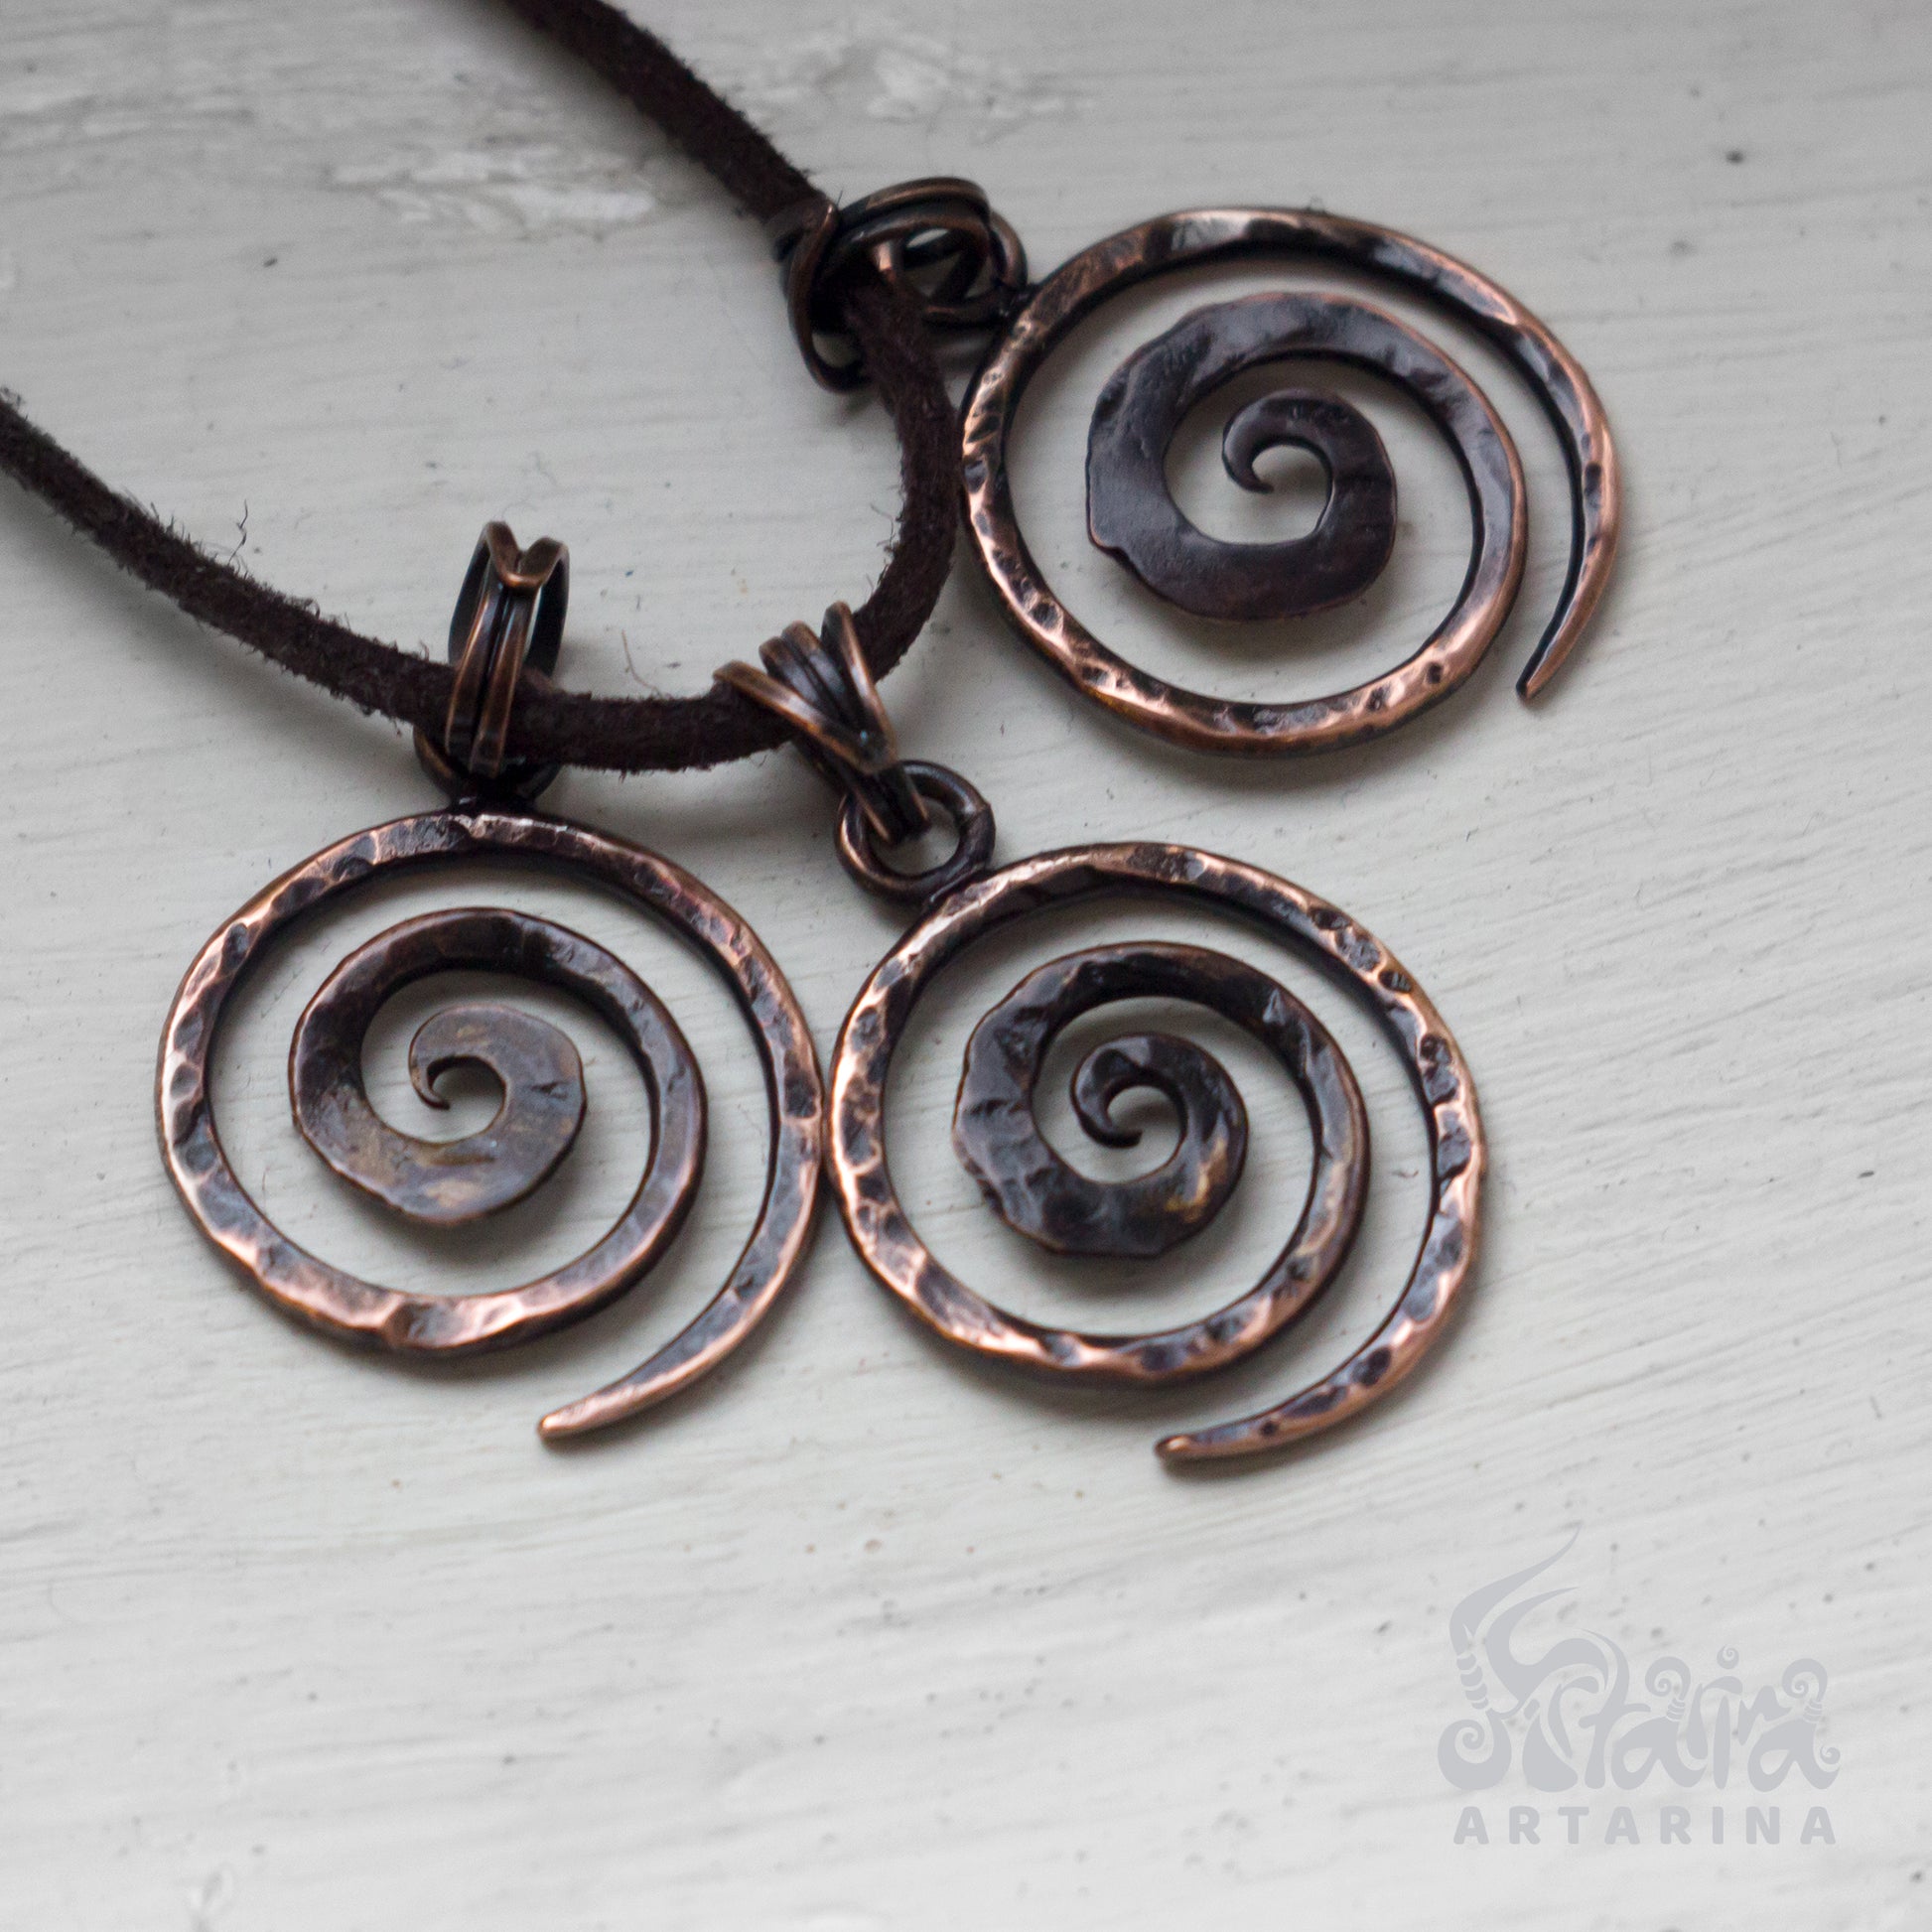 Copper hammered statement spiral necklace / rustic spiral jewelry pic 2